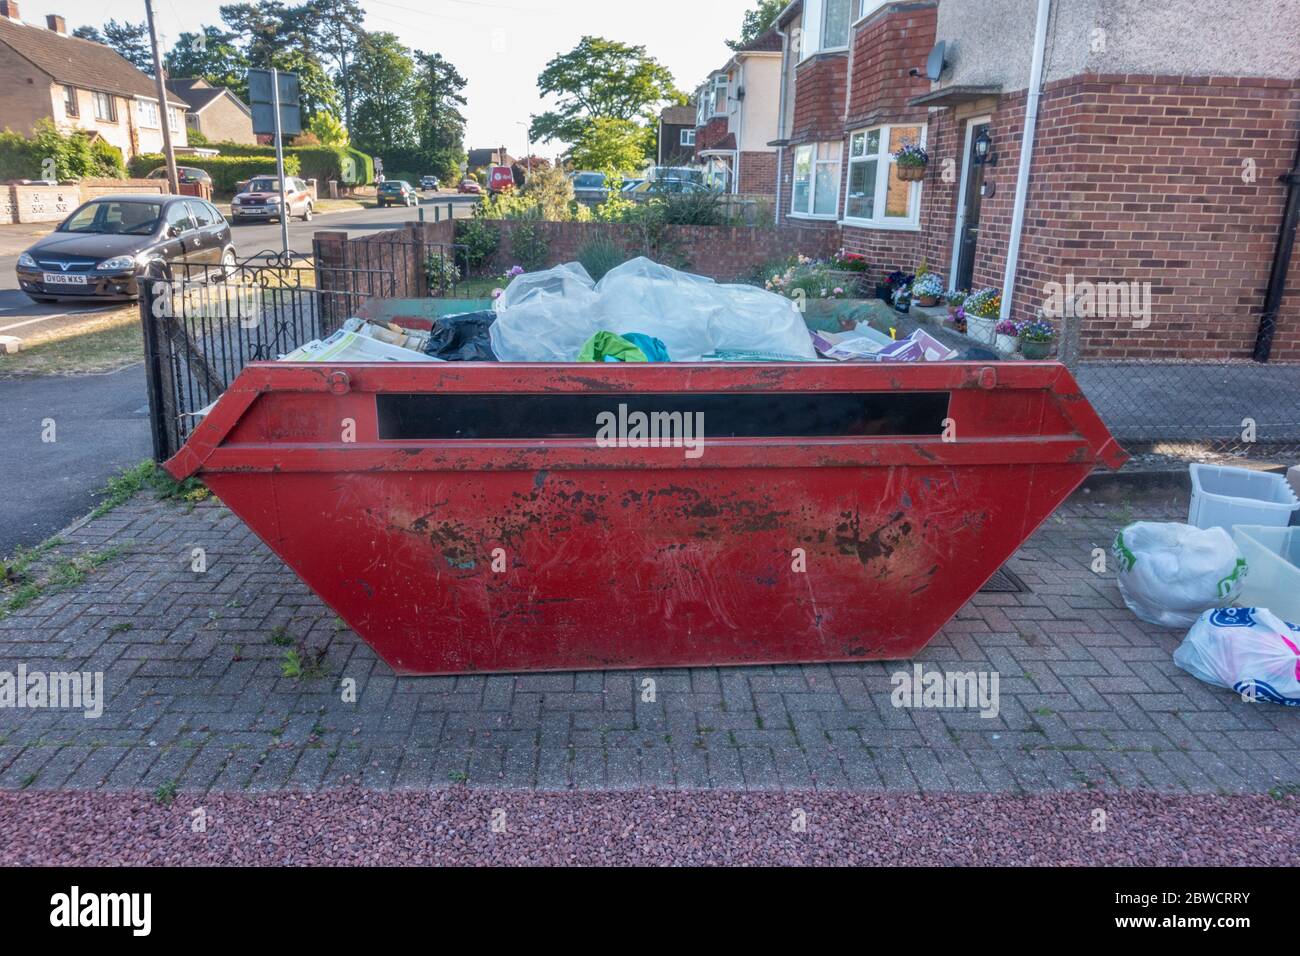 A skip on the driveway of a residential house full of rubbish as the home owner is having a clear out of hoarded rubbish. Stock Photo